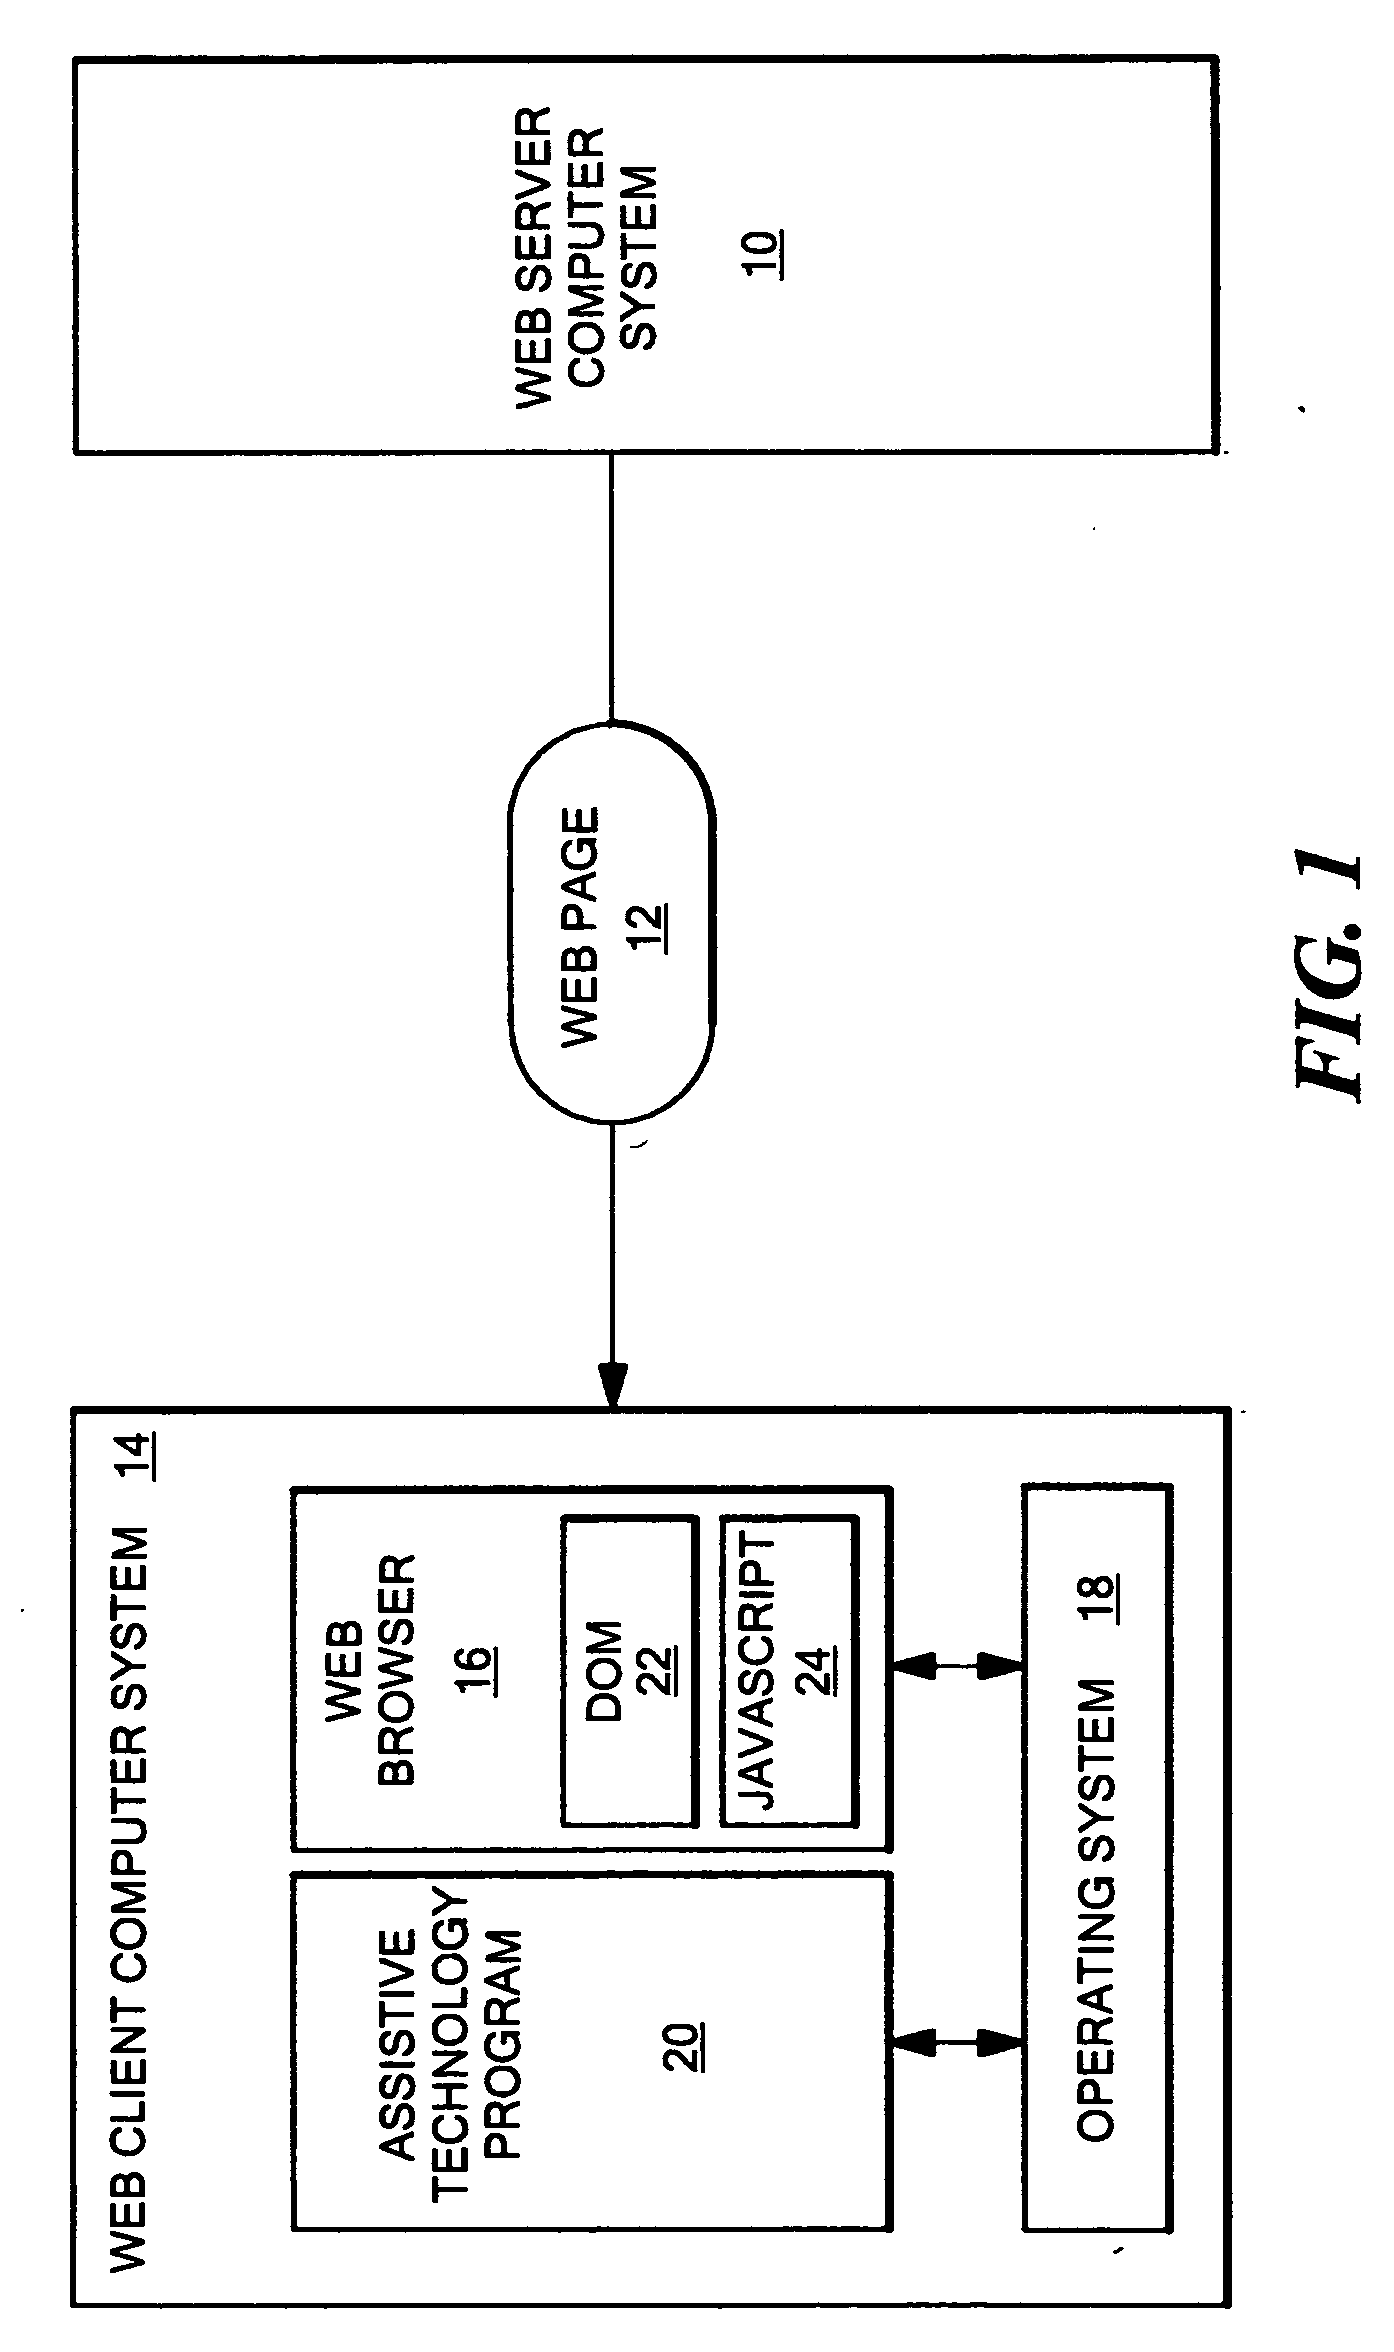 Method and apparatus for providing DHTML accessibility